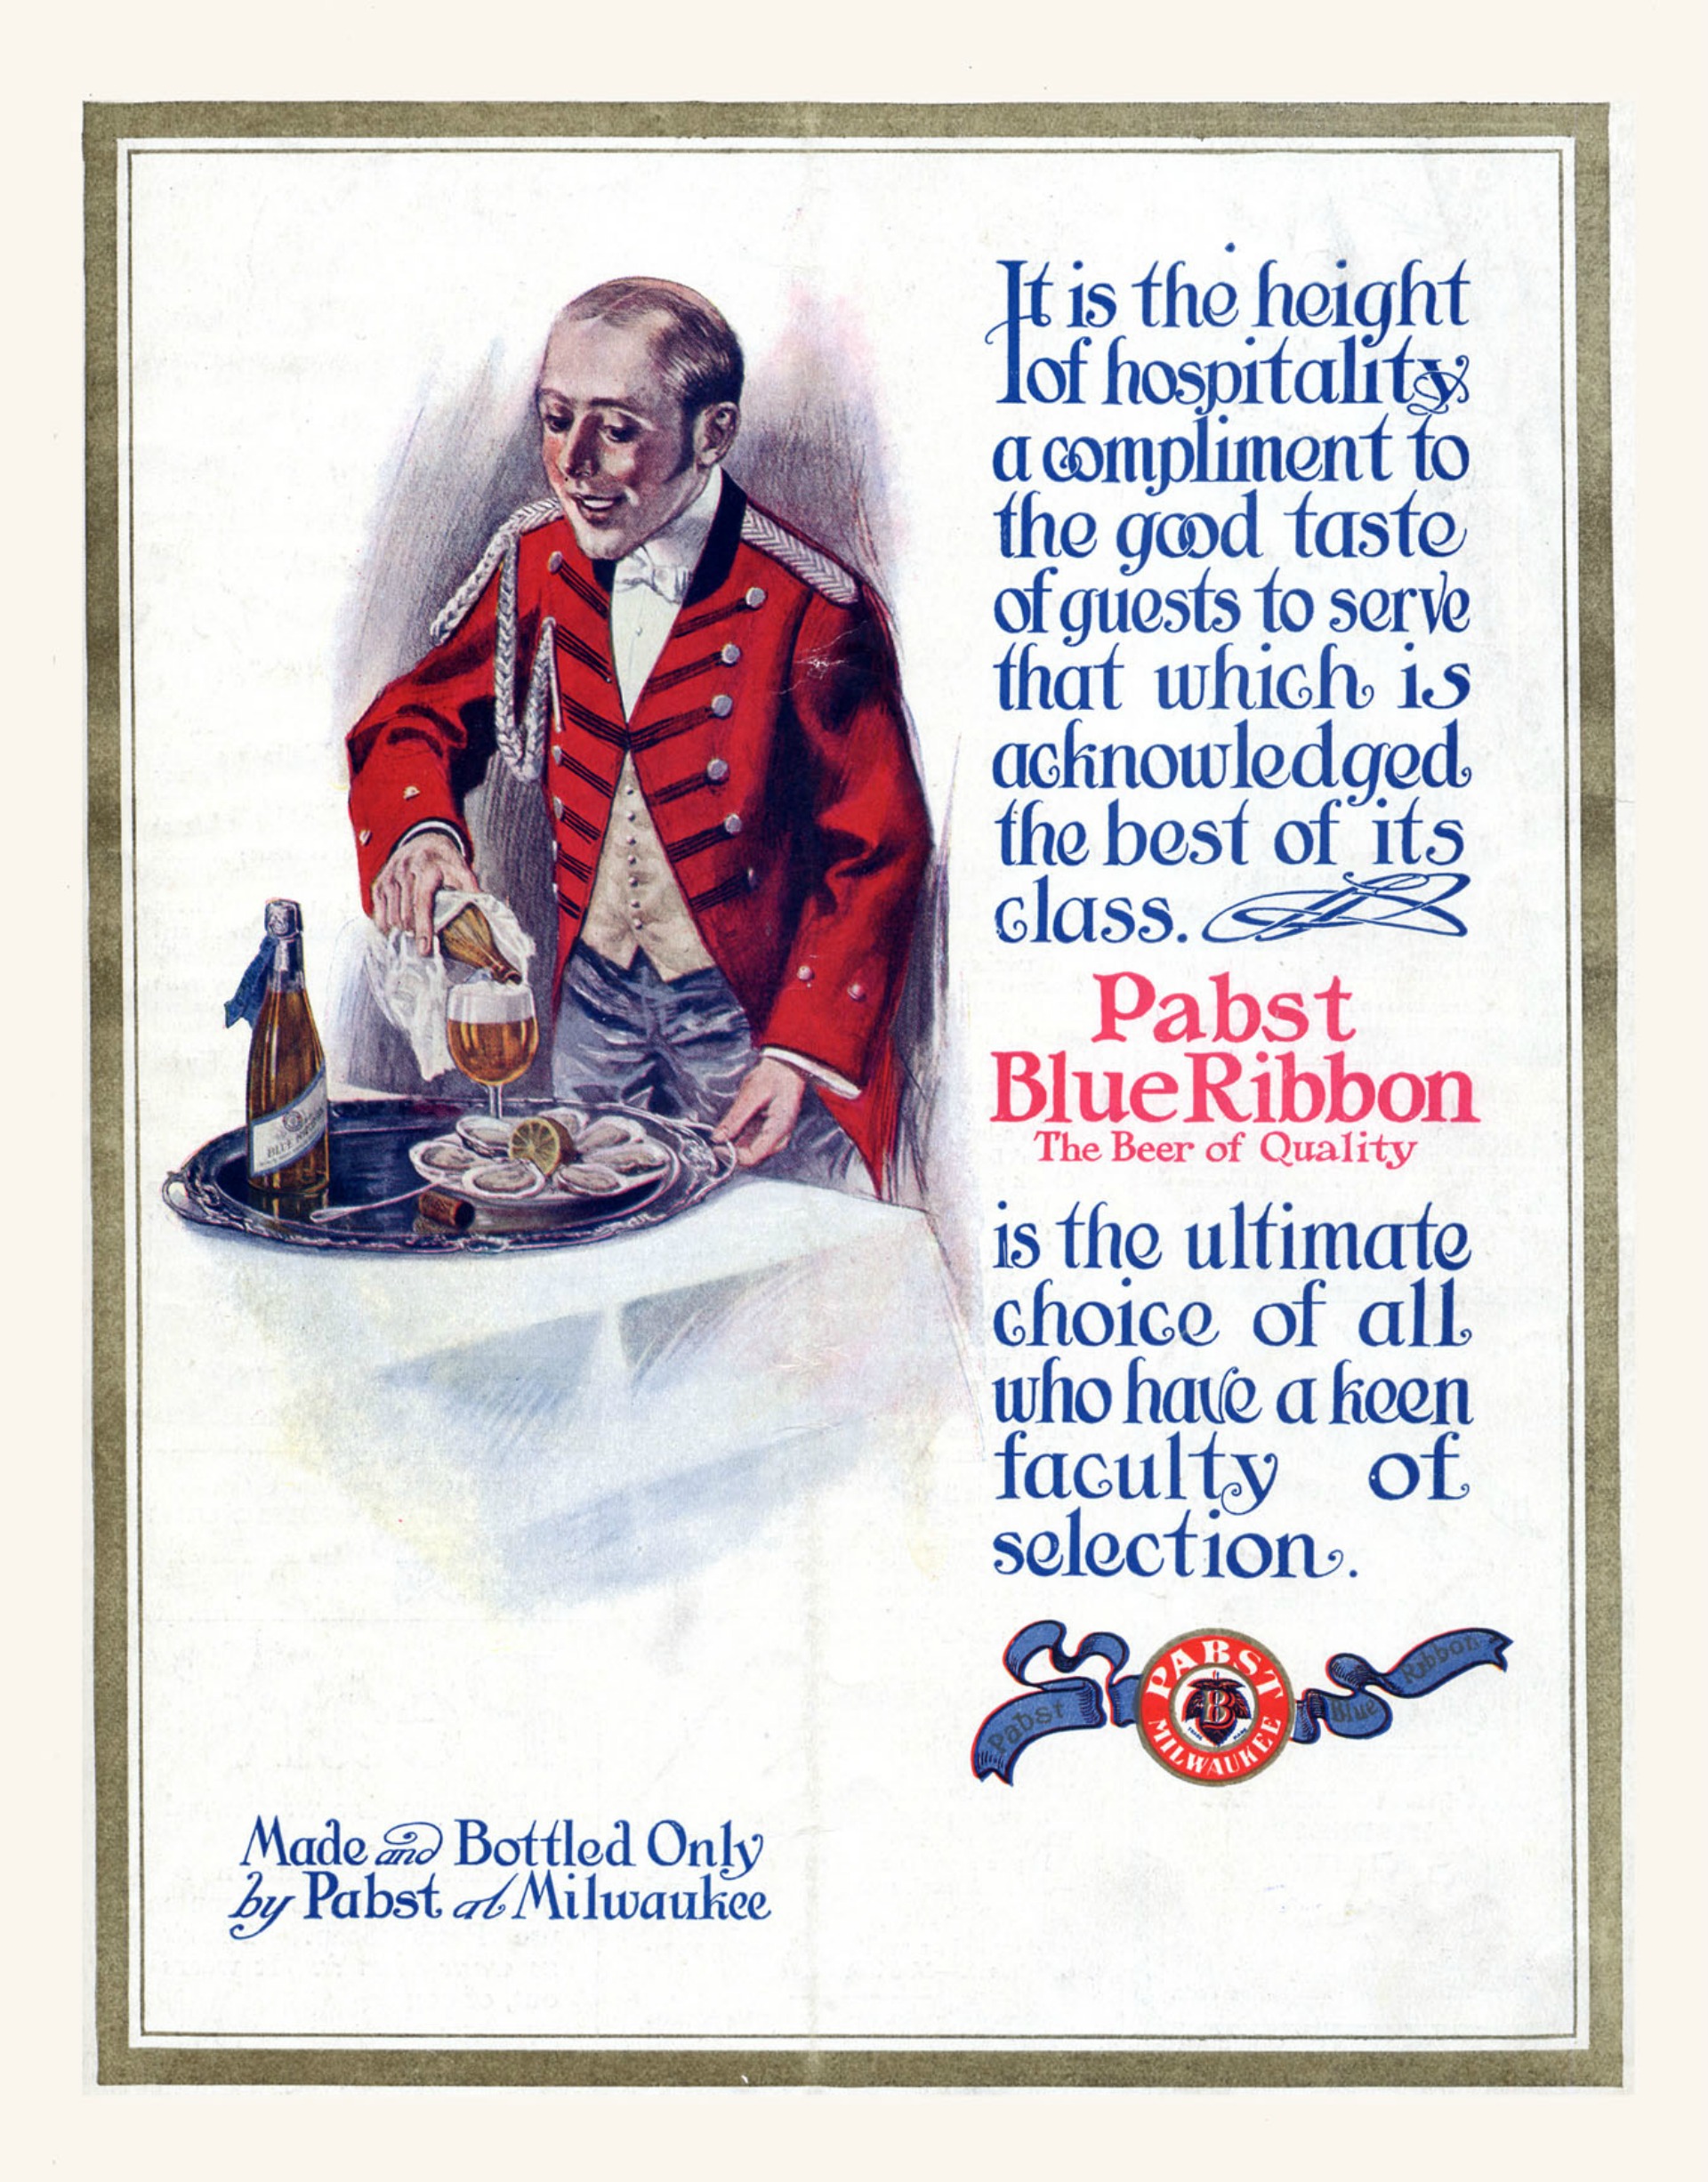 A 1911 ad for Pabst Blue Ribbon Credit: Public Domain, pre 1923. Back cover of Judge magazine, June 10, 1911.